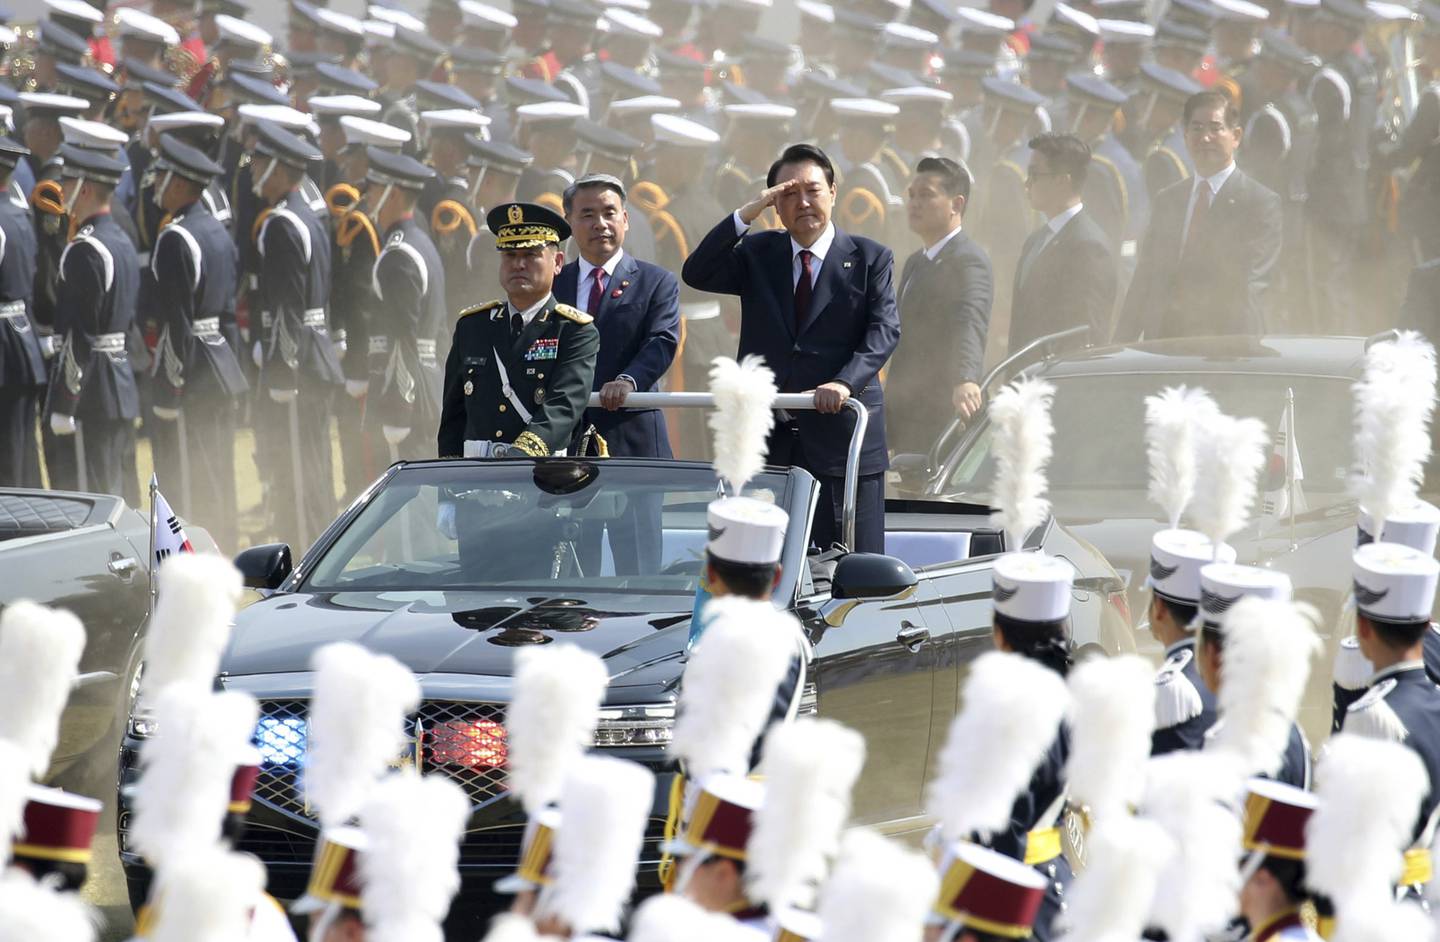 South Korean President Yoon Suk Yeol salutes as he inspects honor guard during the 74th anniversary of Armed Forces Day at the Gyeryong military headquarters in Gyeryong, South Korea, Saturday, Oct. 1, 2022.